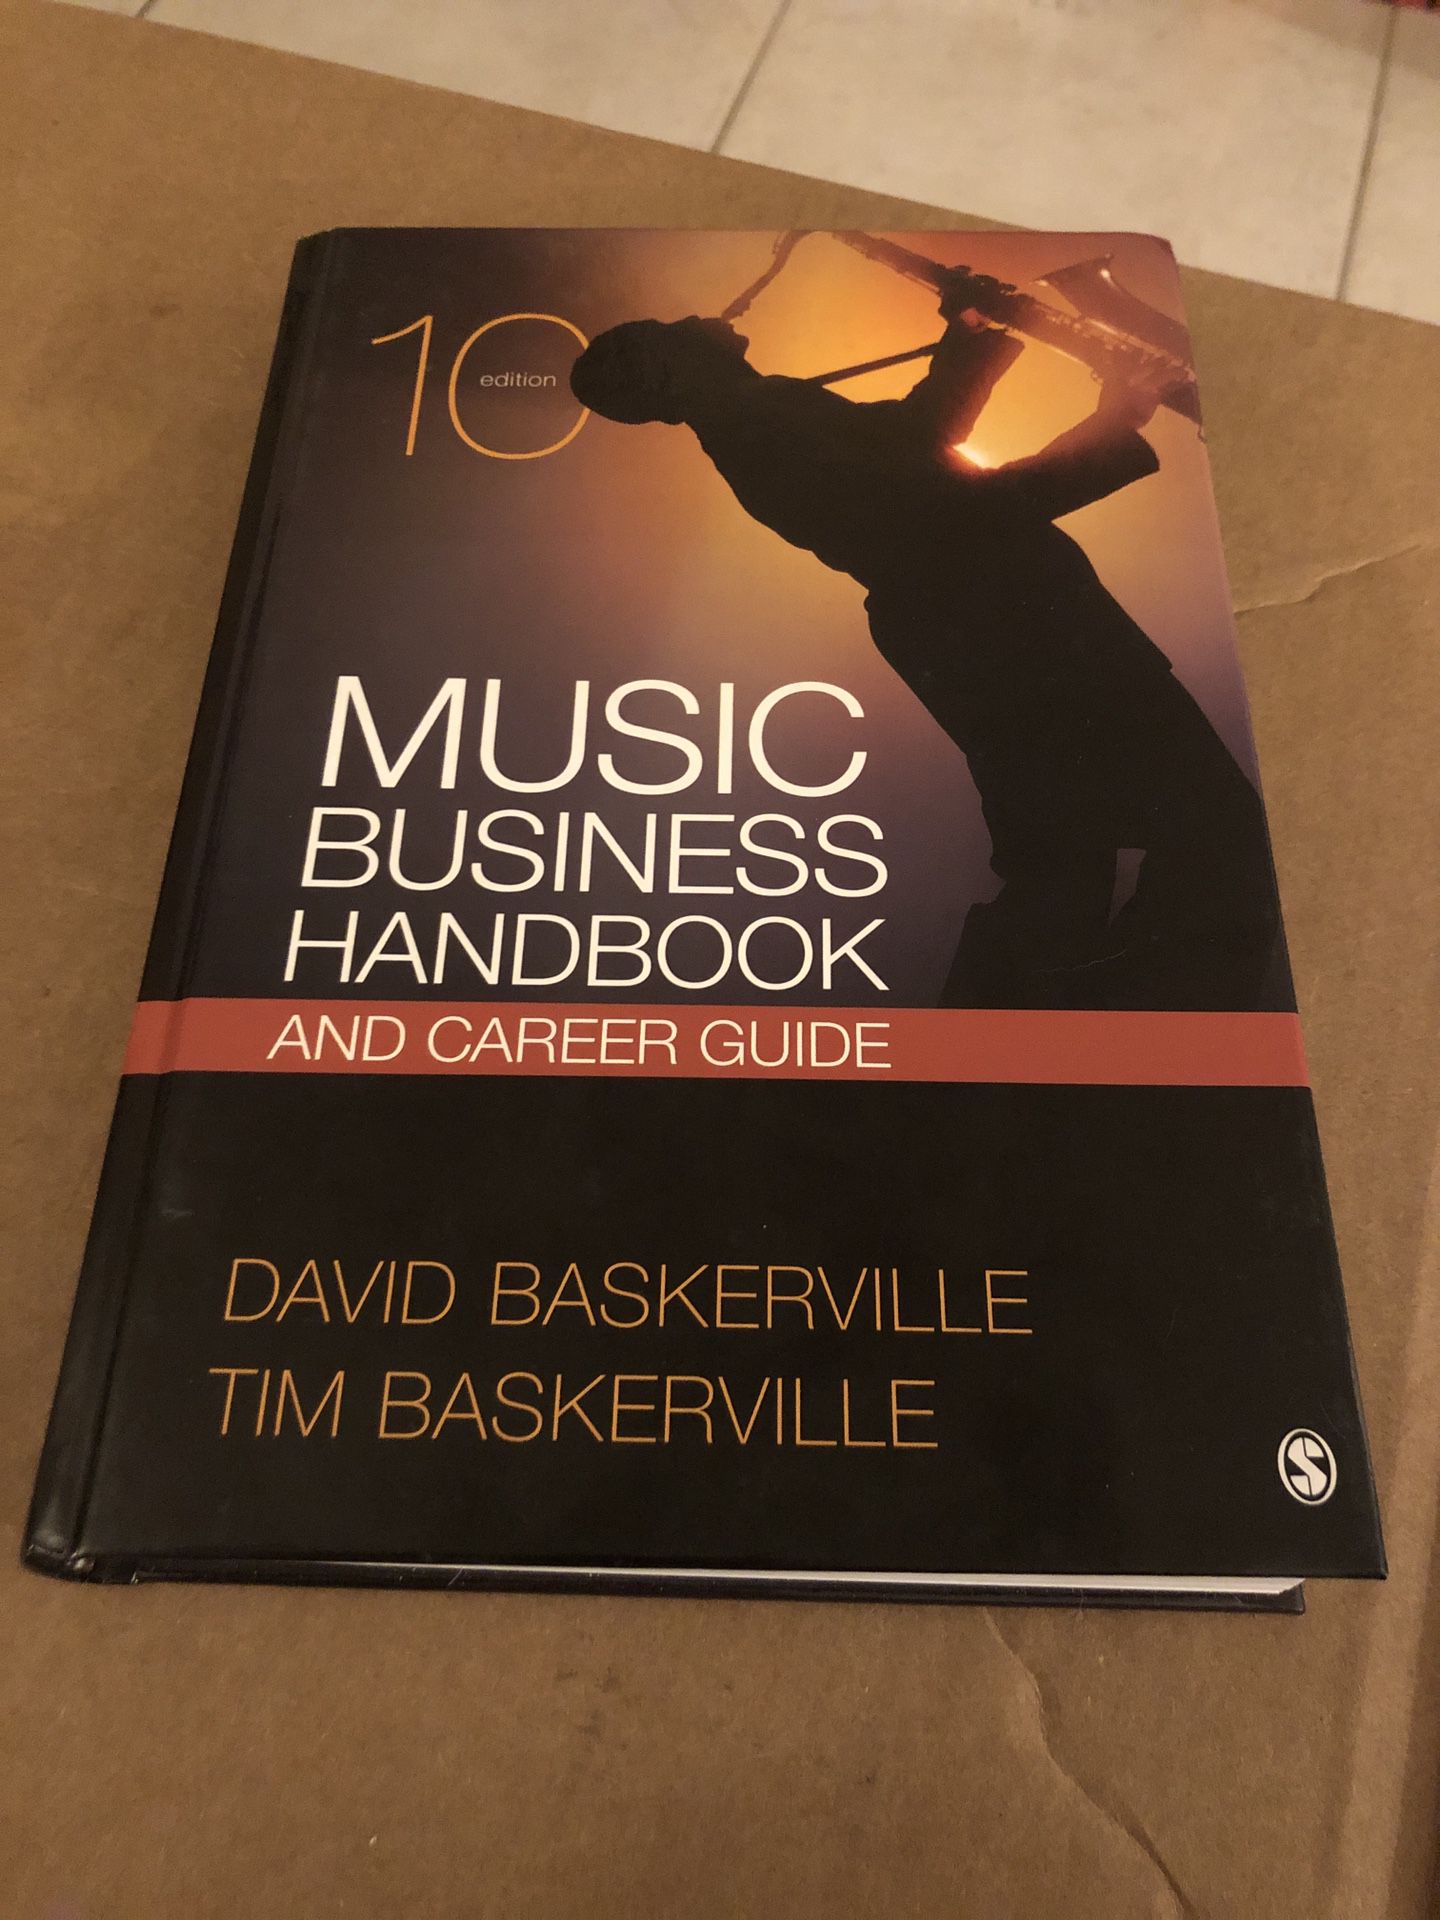 Music Business Handbook and Career Guide by David Baskerville and Tim...